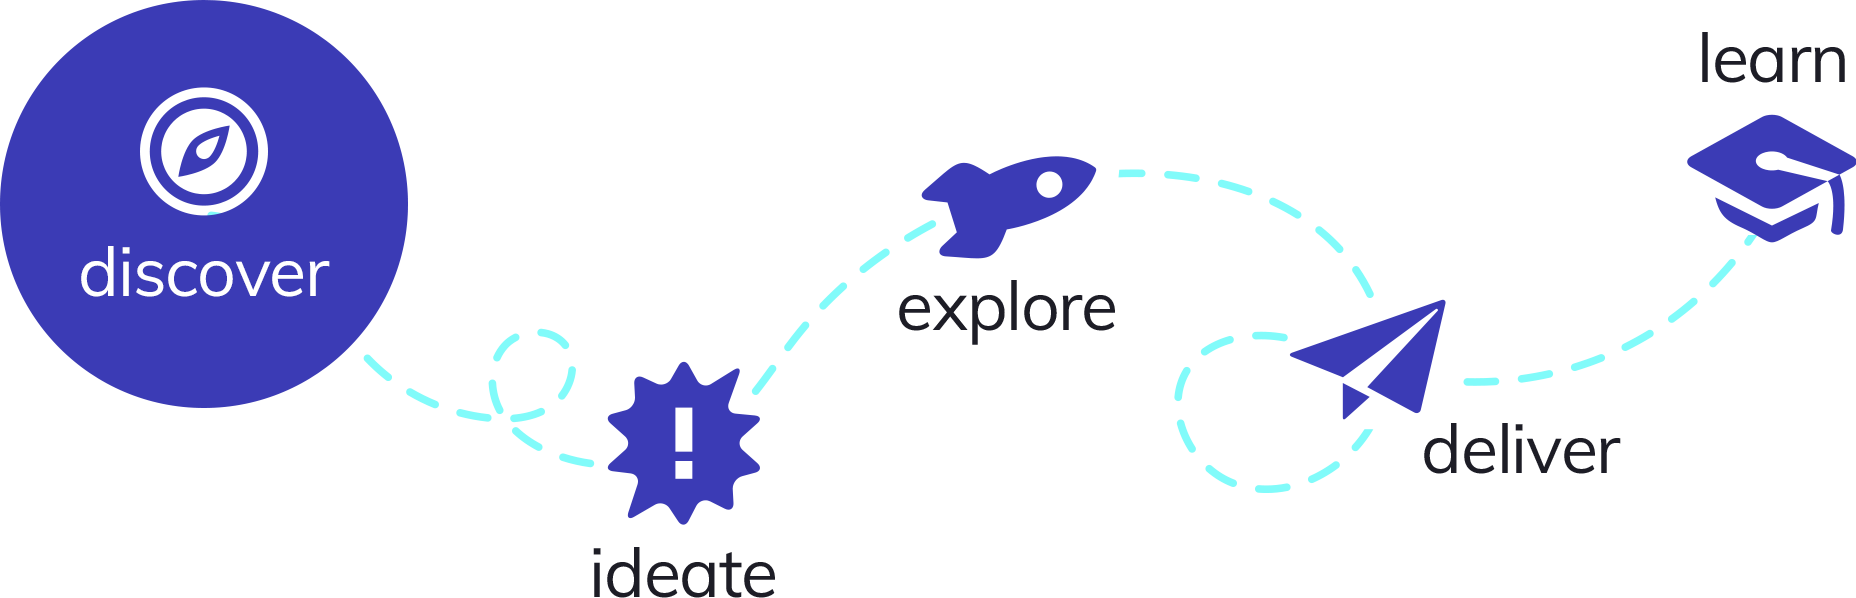 Method diagram: discover, ideate, explore, deliver and learn